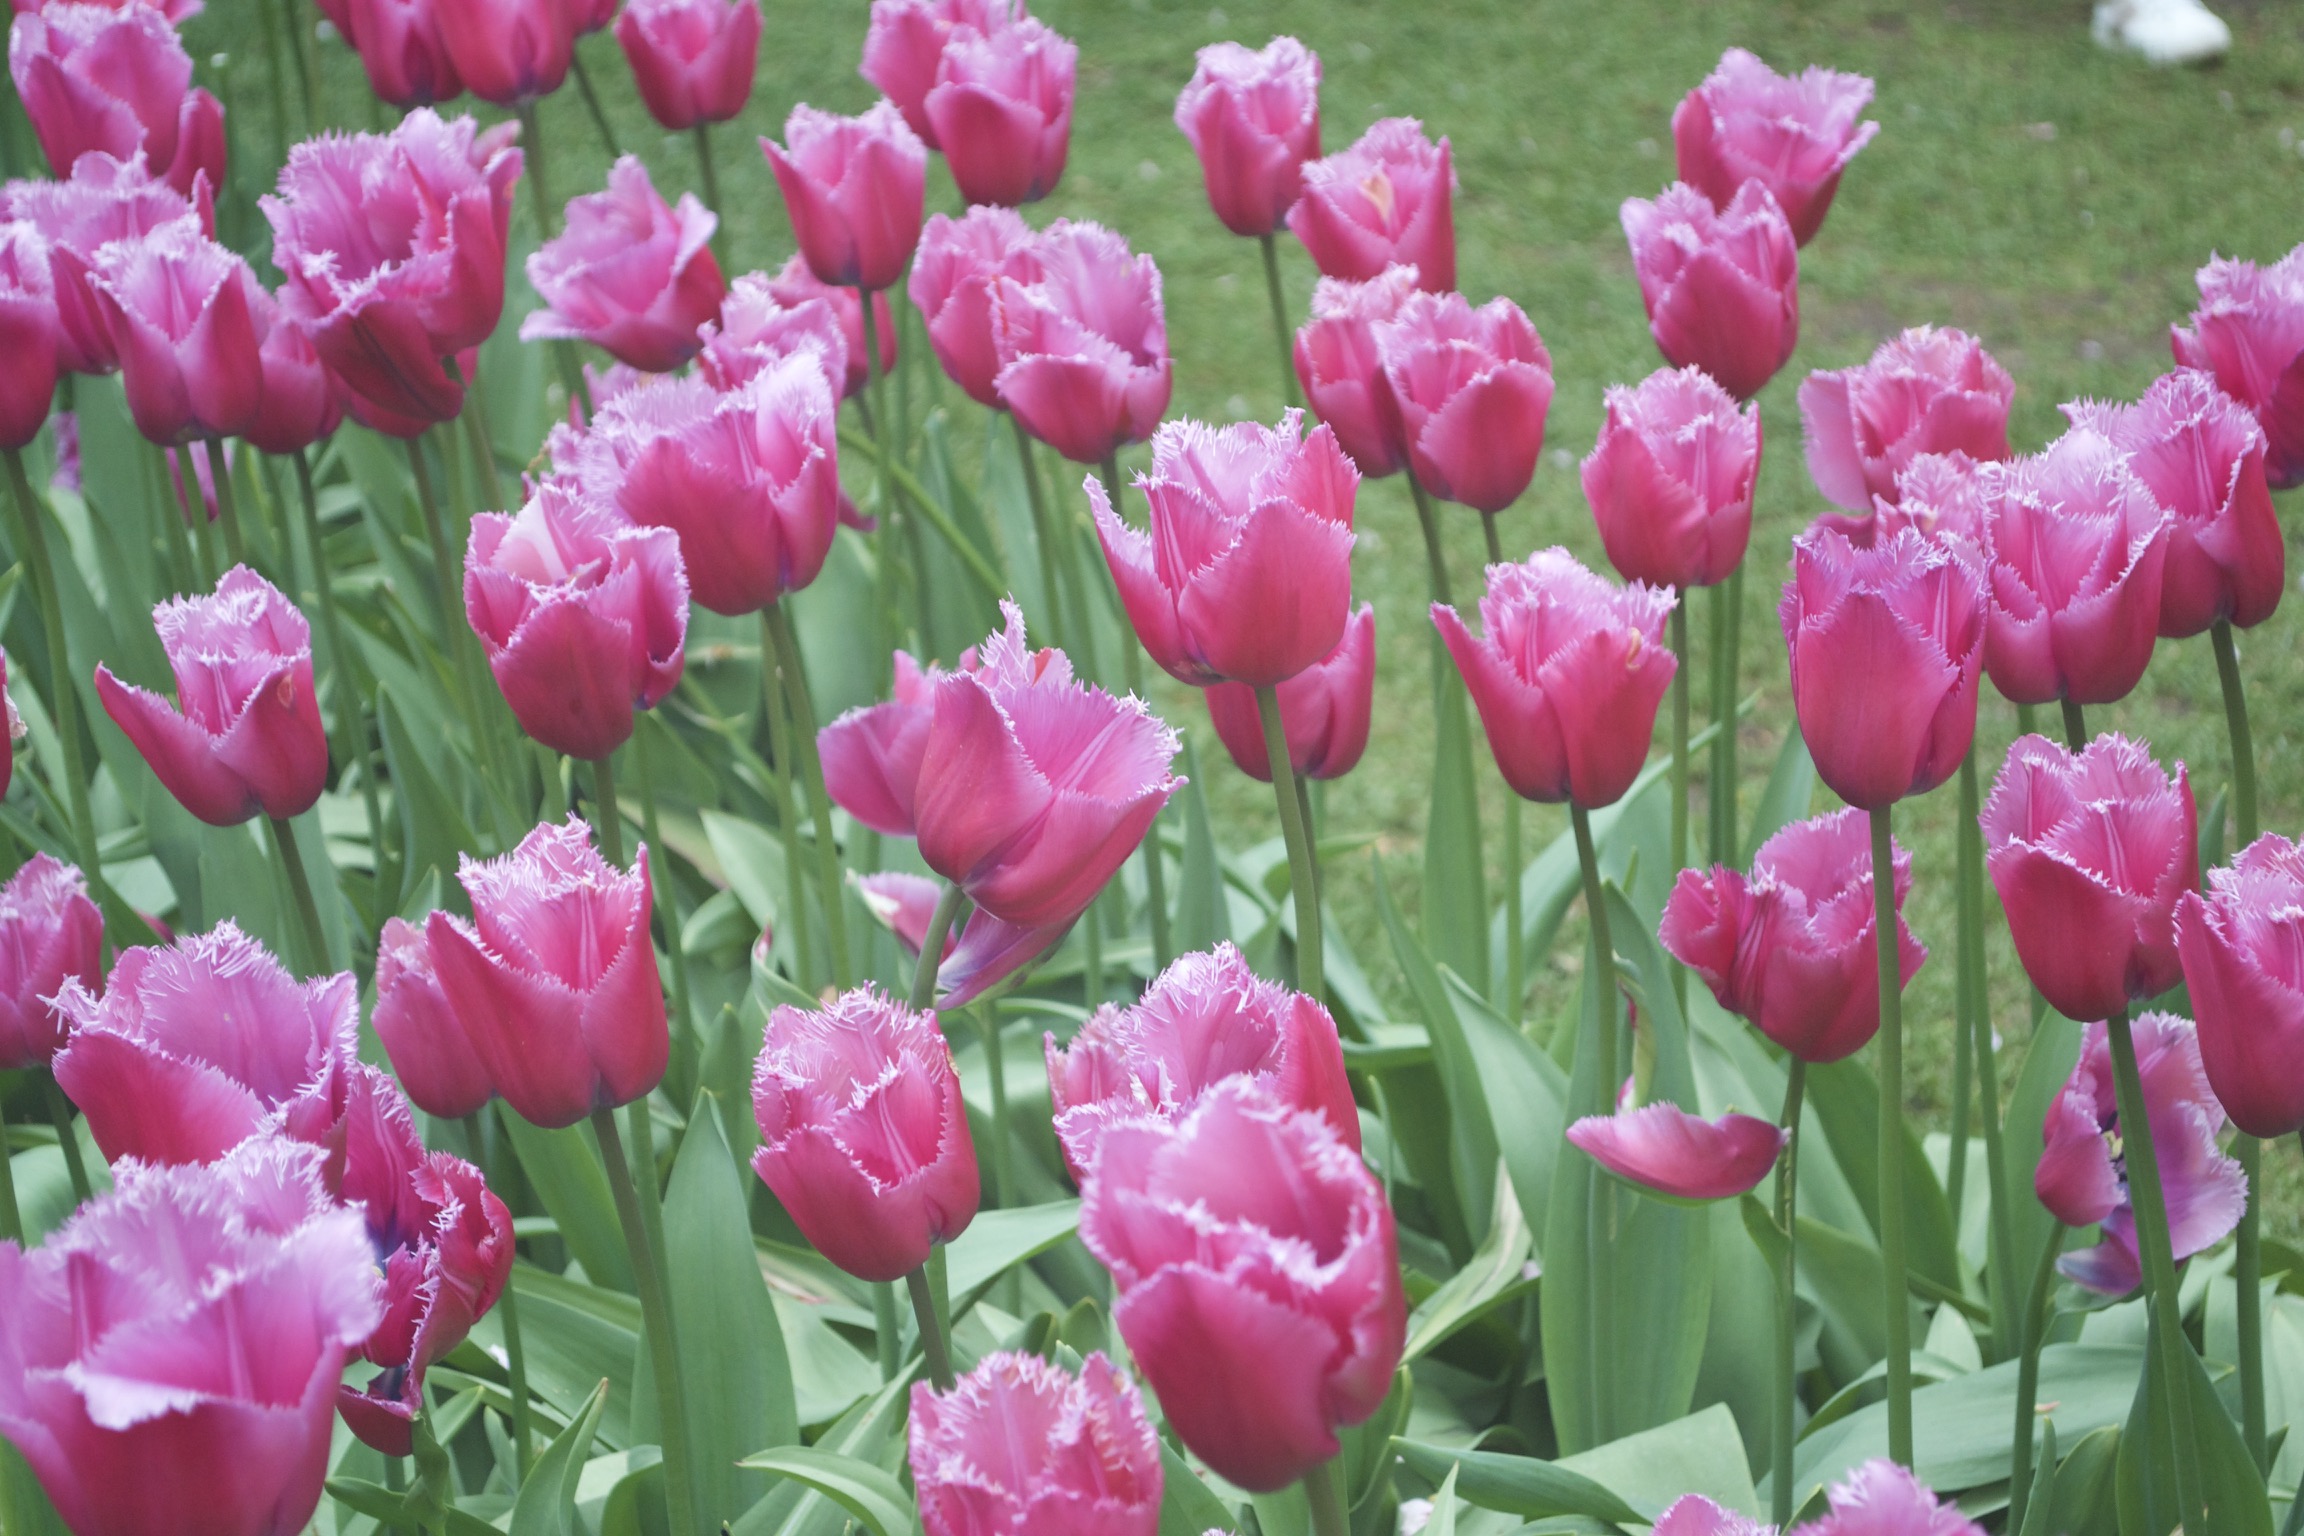 Bright magenta tulips with petals with fringed edges.